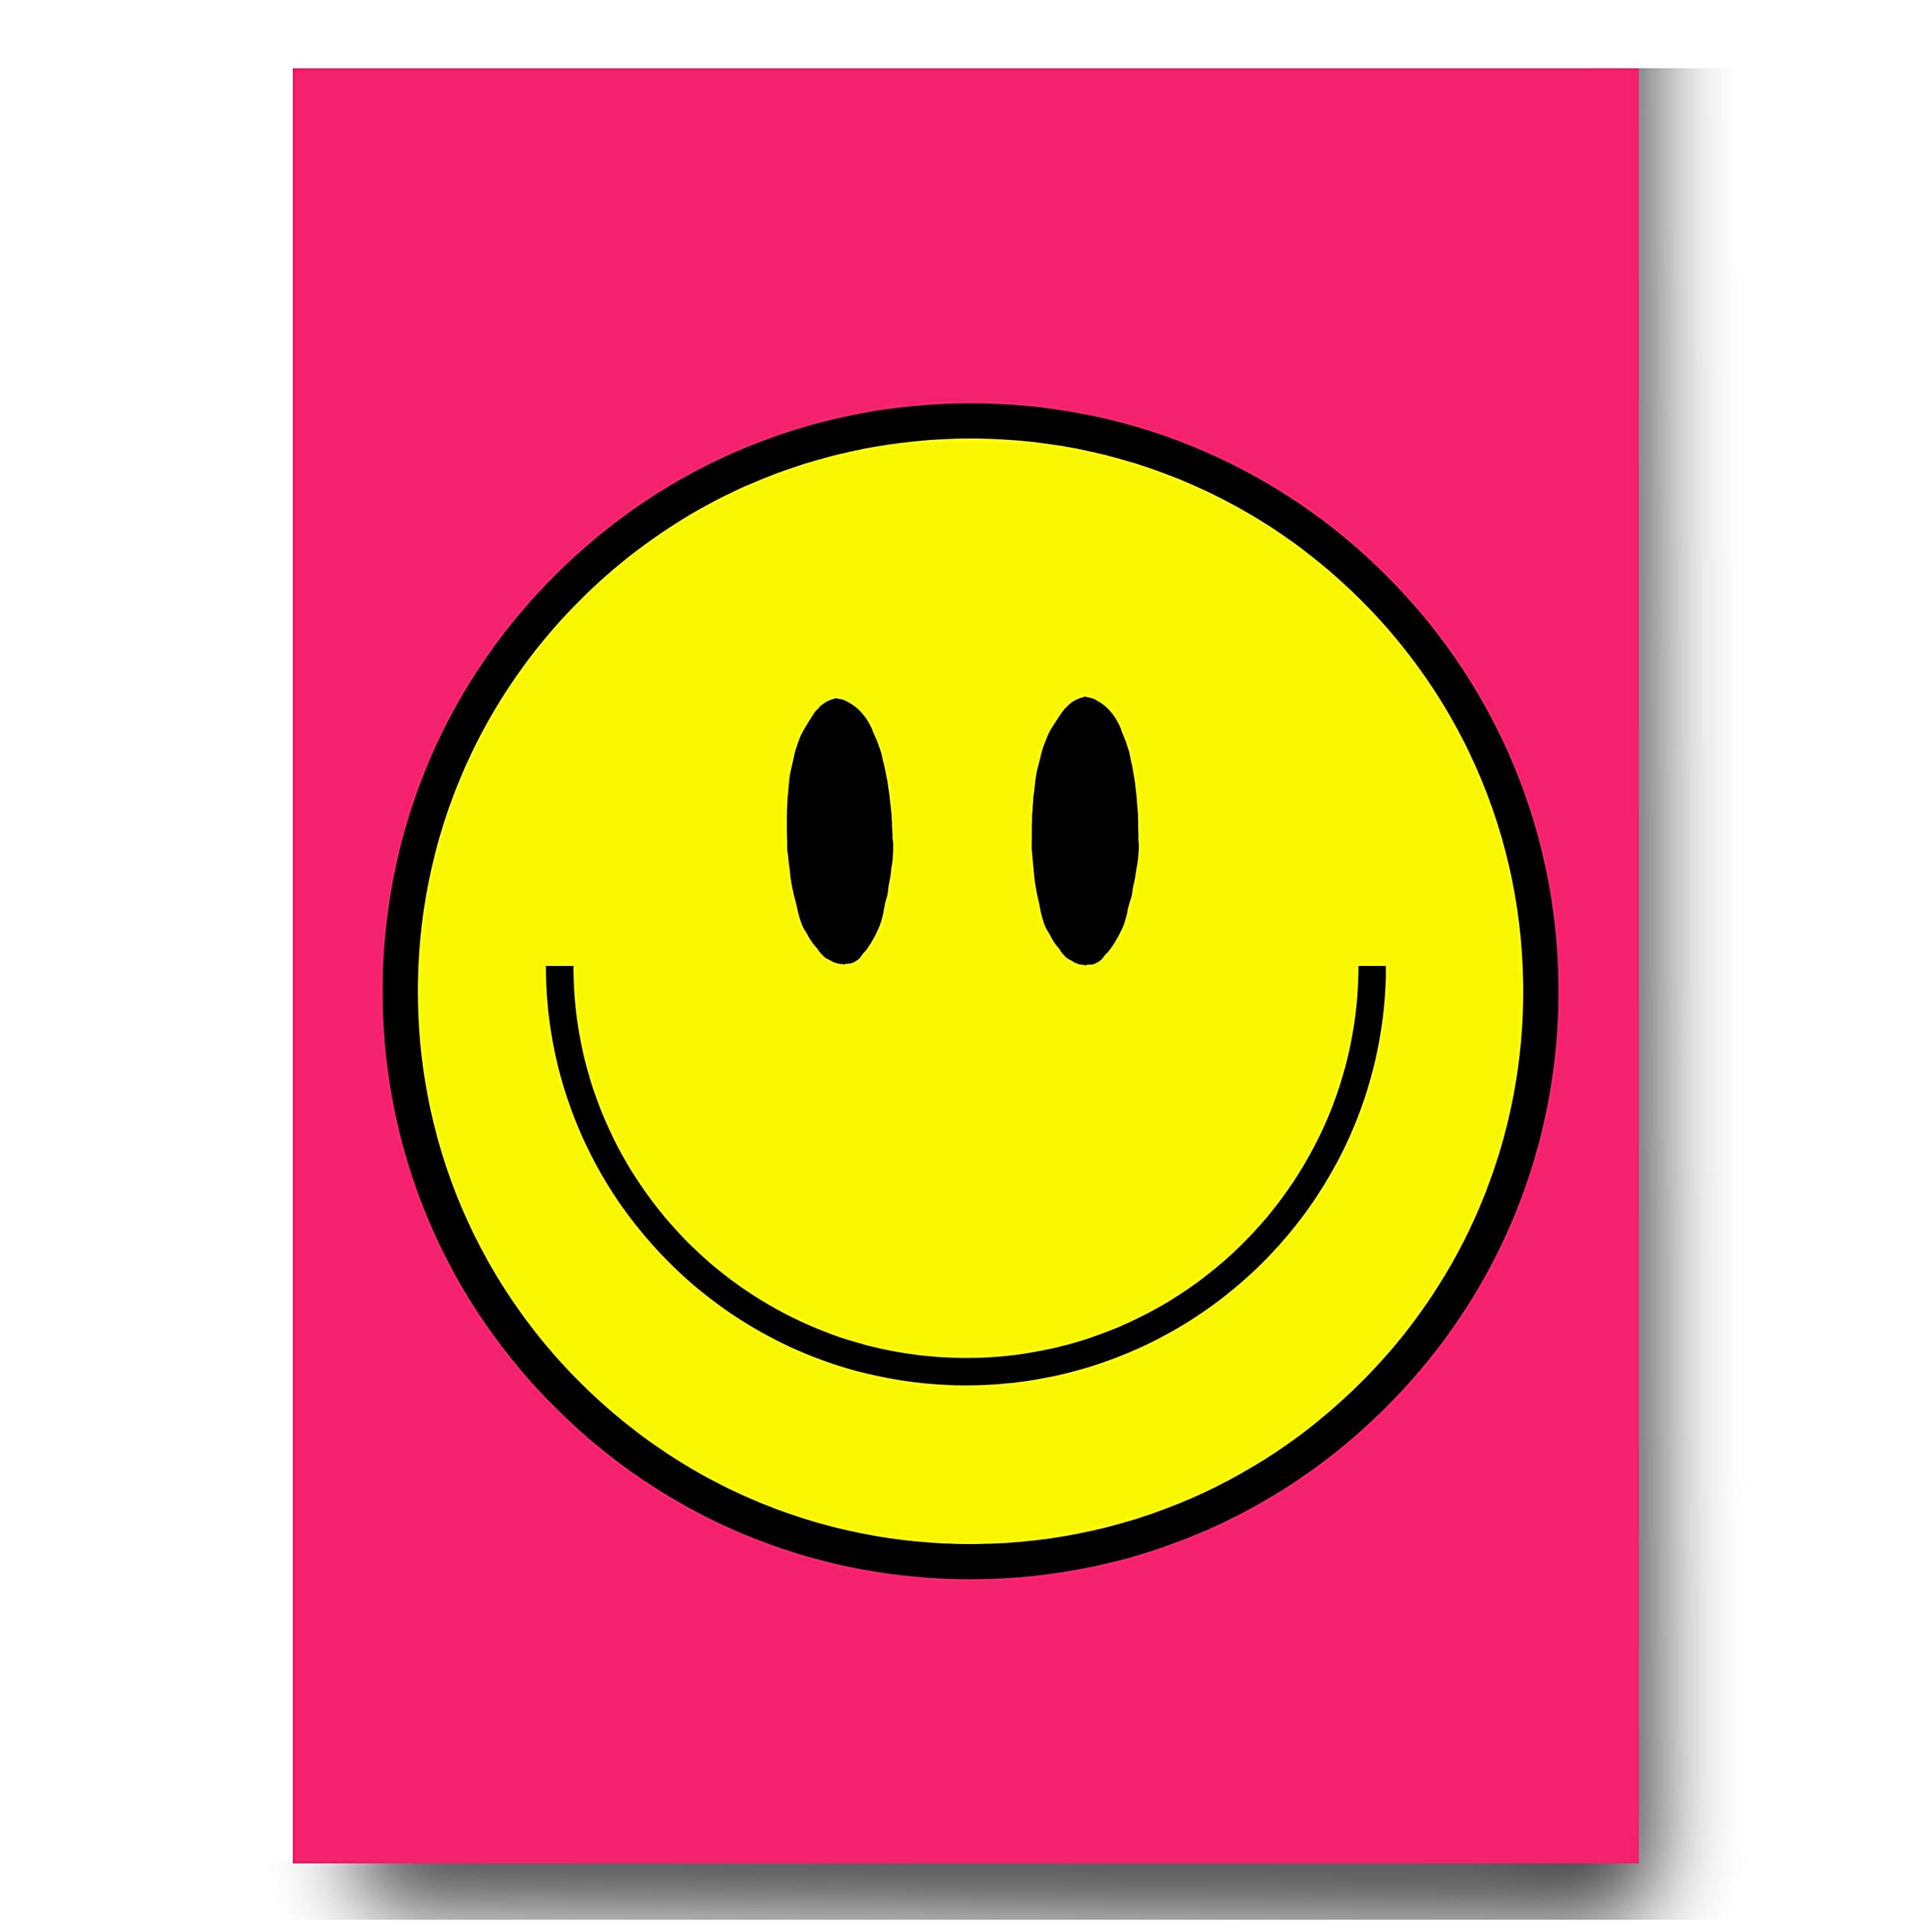 Preppy Room Decor Aesthetic Smiley Face Poster Wall Art for Teen Girls Bedroom, Cute Preppy Prints, Posters, Gifts for Teens Girls Y2K Room or Dorm Decoration. 12x16in, UNFRAMED, Hot Pink